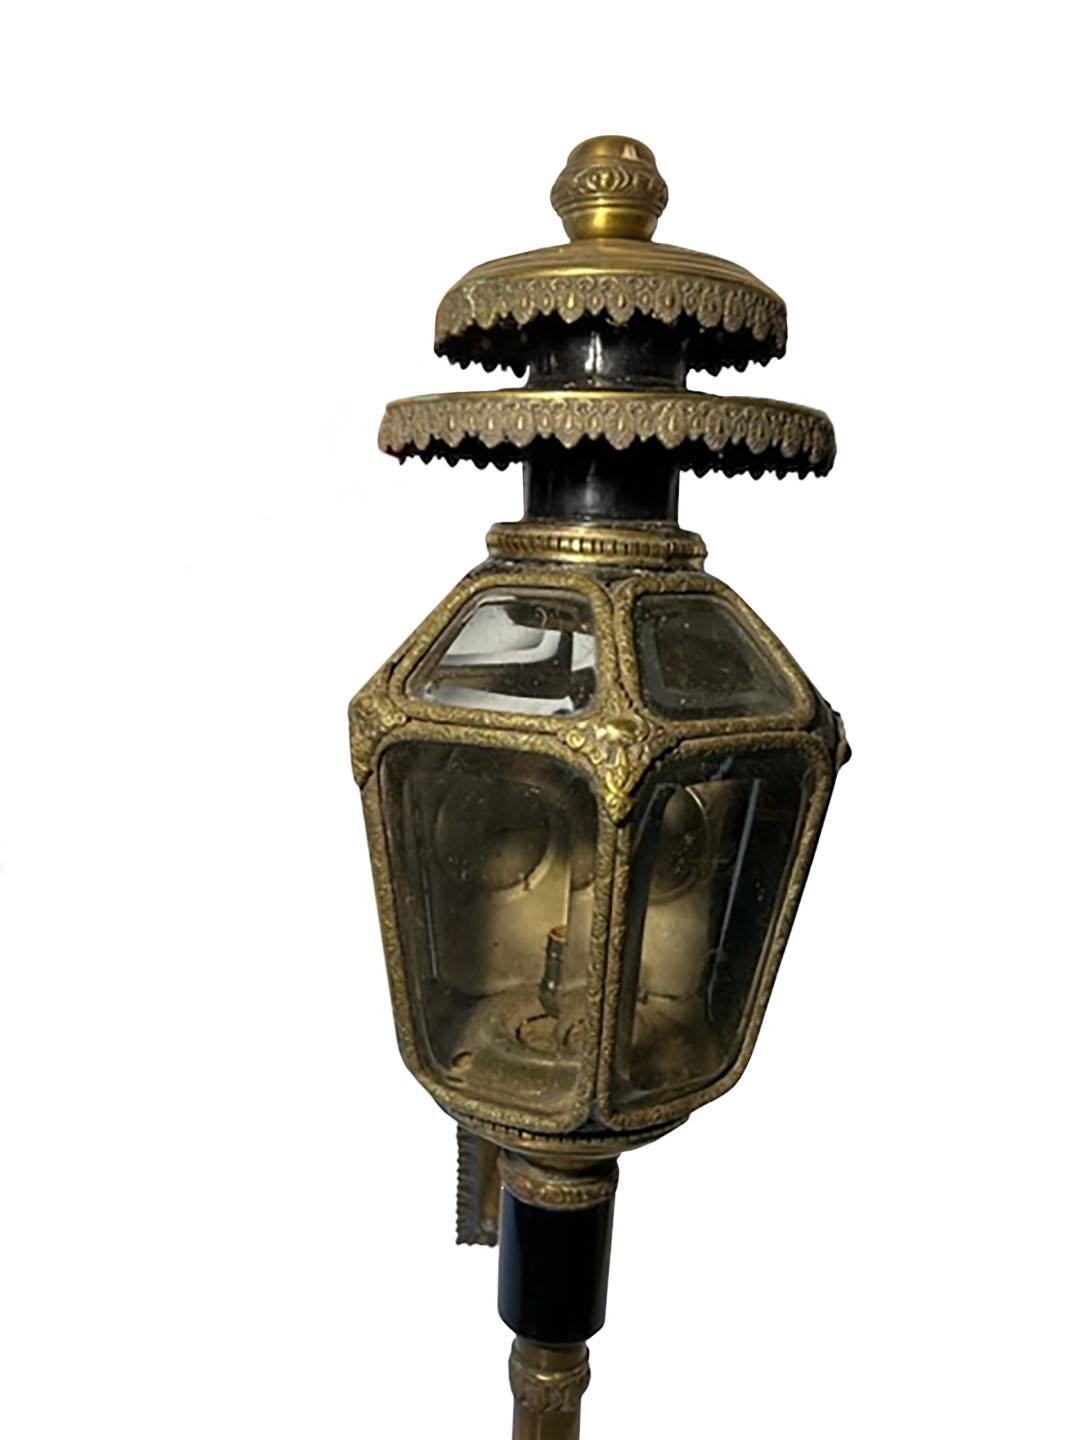 A pair of antique brass coach lamps with original beveled glass, circa 1870, France. The coach lamps are hardwired but needs to be checked by electrician appears to be okay. No guarantees for electrical. Excellent condition no cracks or chips.